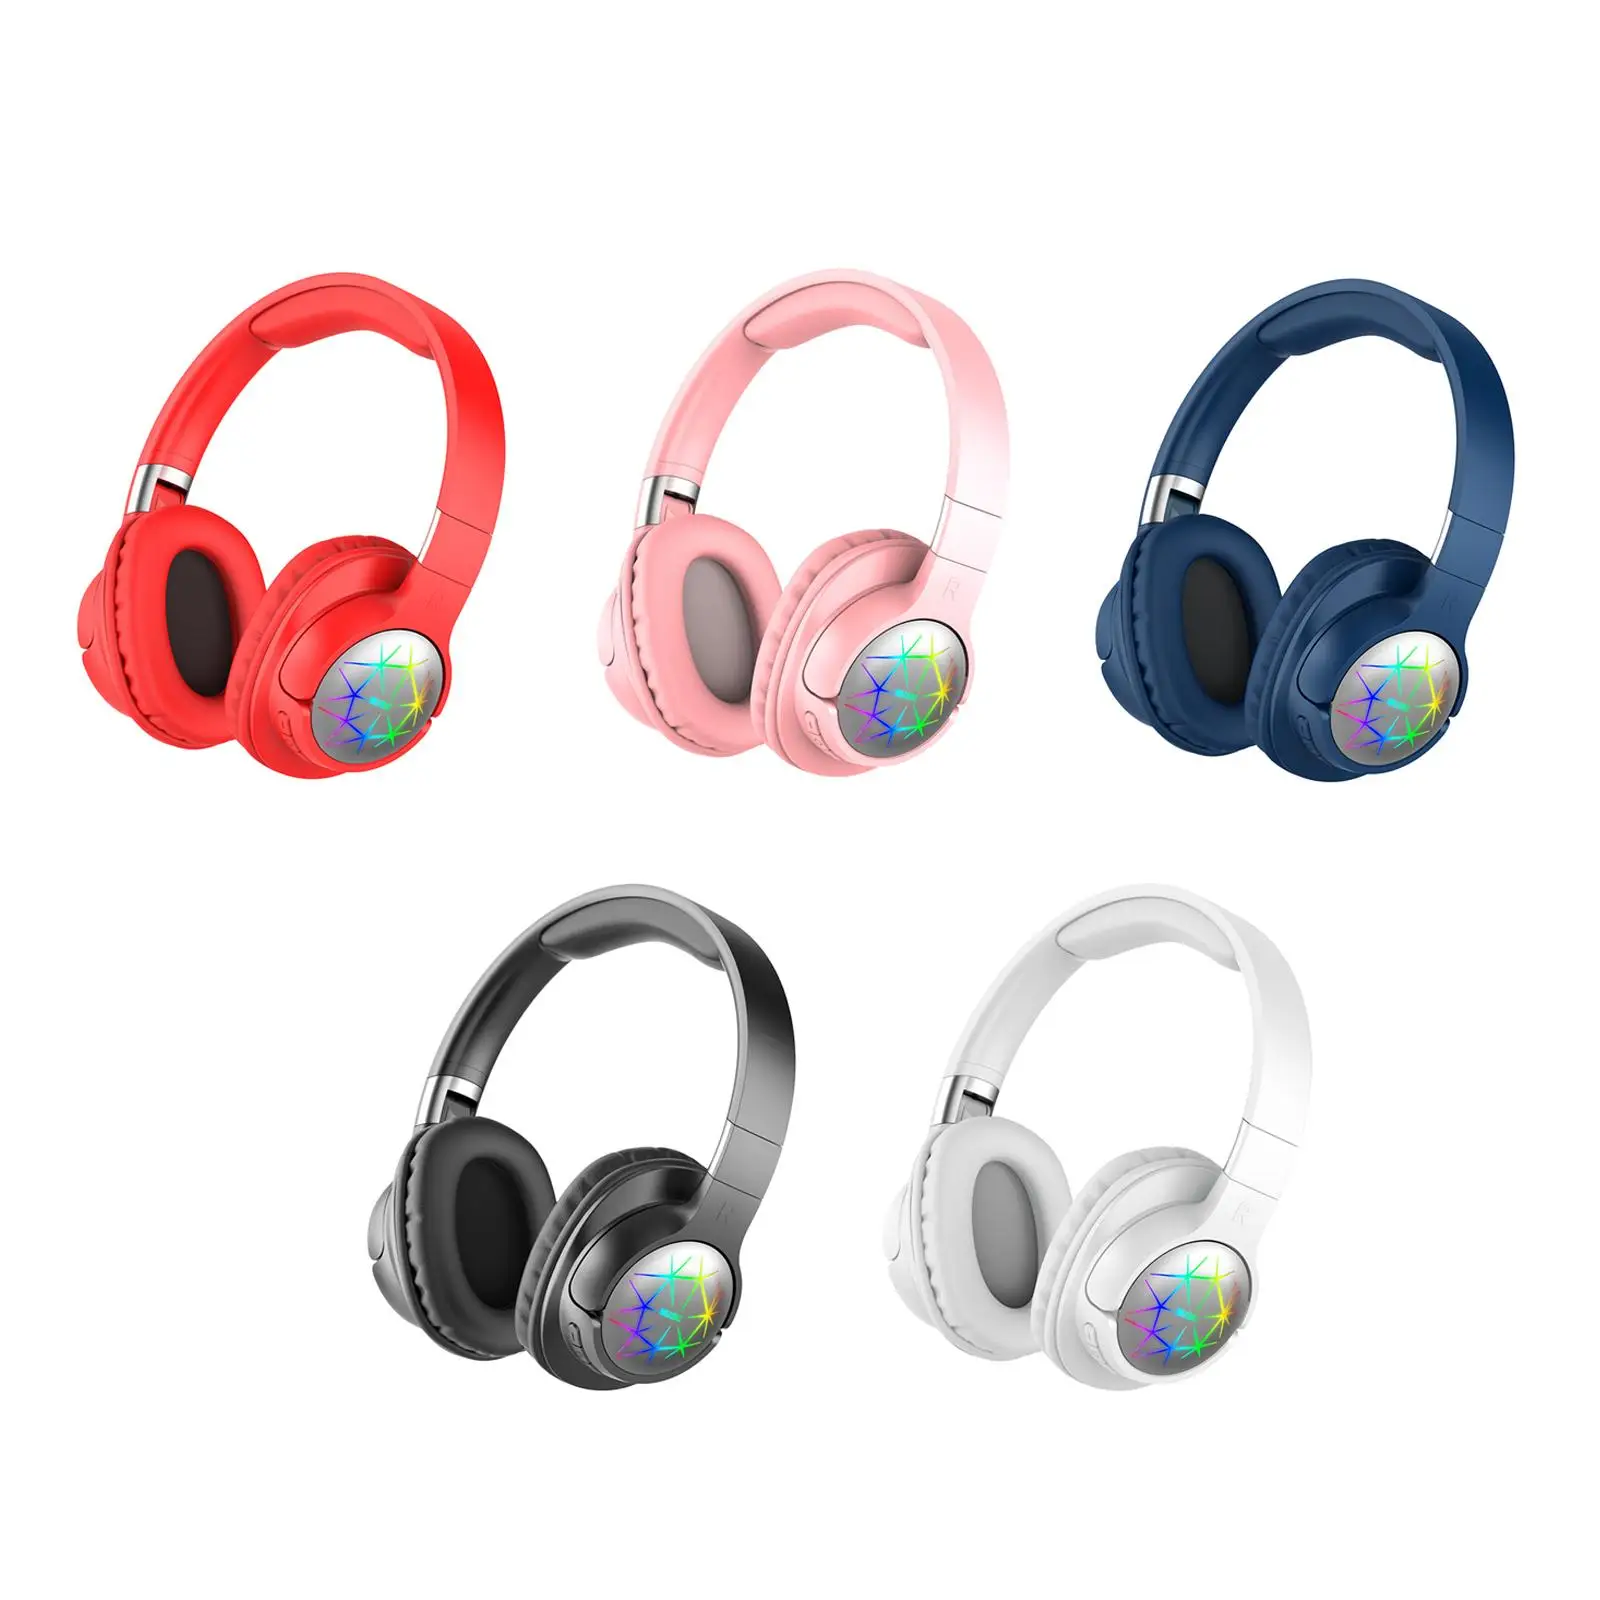 Over-Ear Bluetooth Headphones Stretchable Soft Earmuffs for Game PC Phone